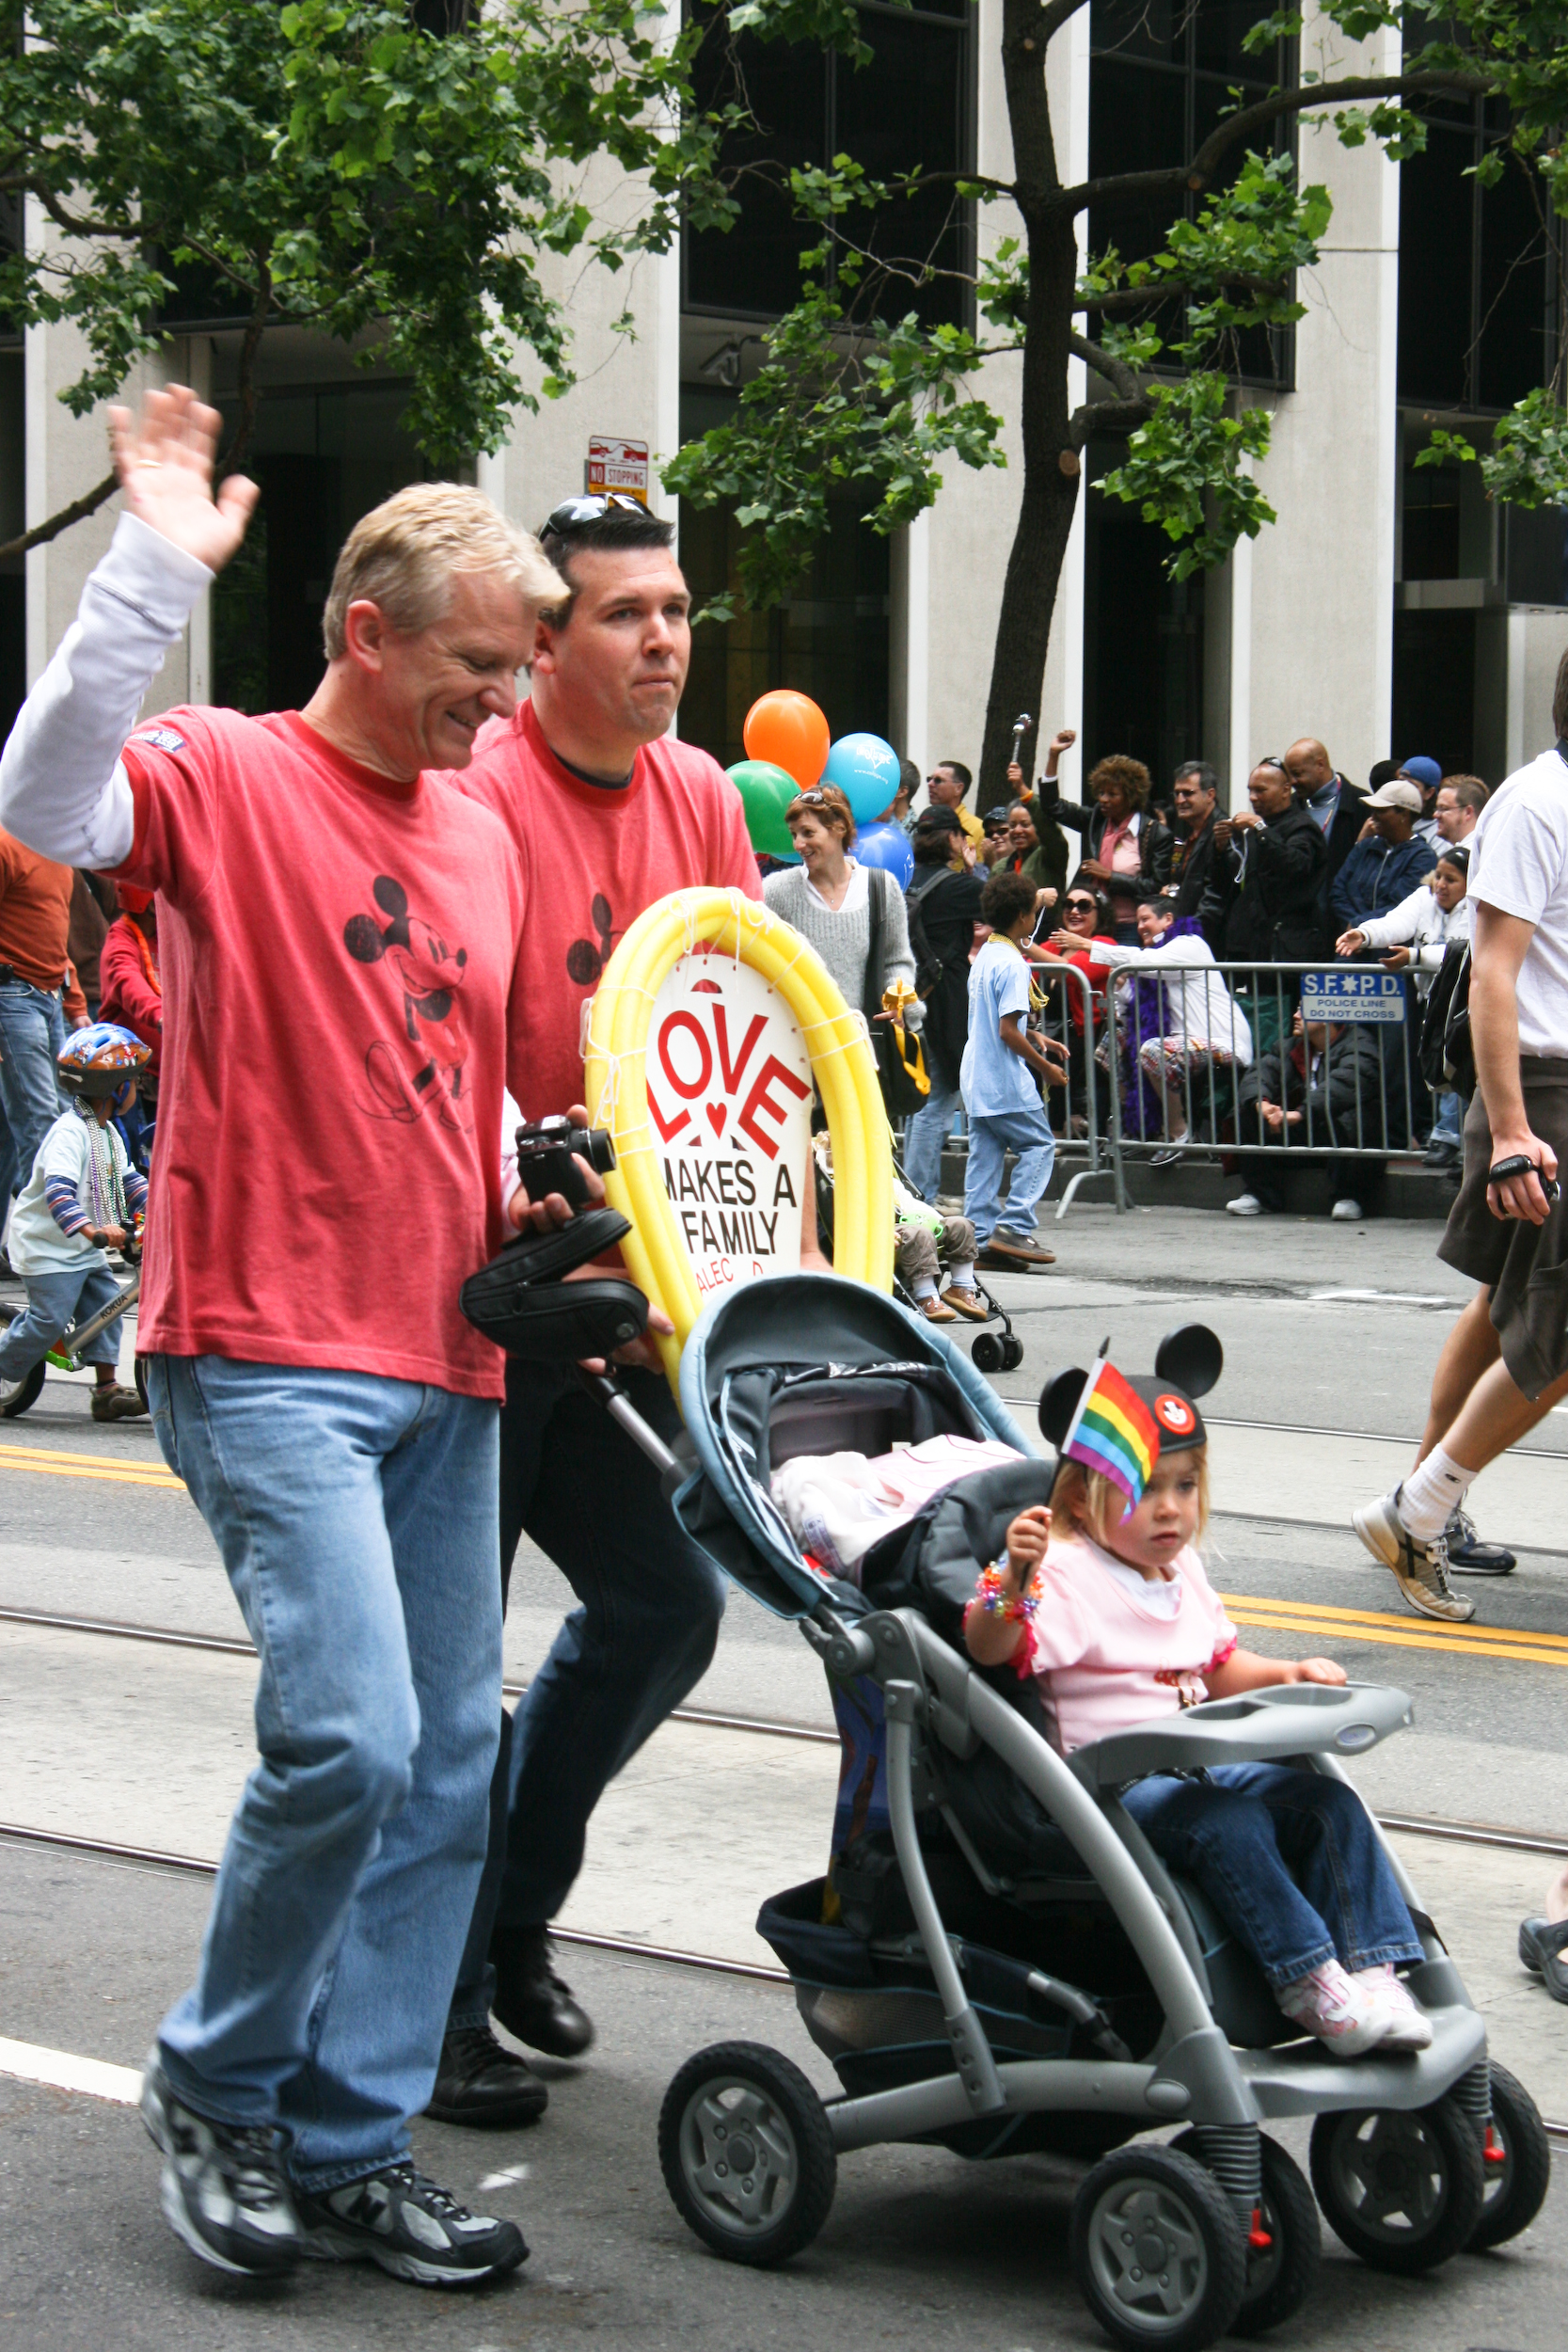 Two men push their child in a stroller at a parade.